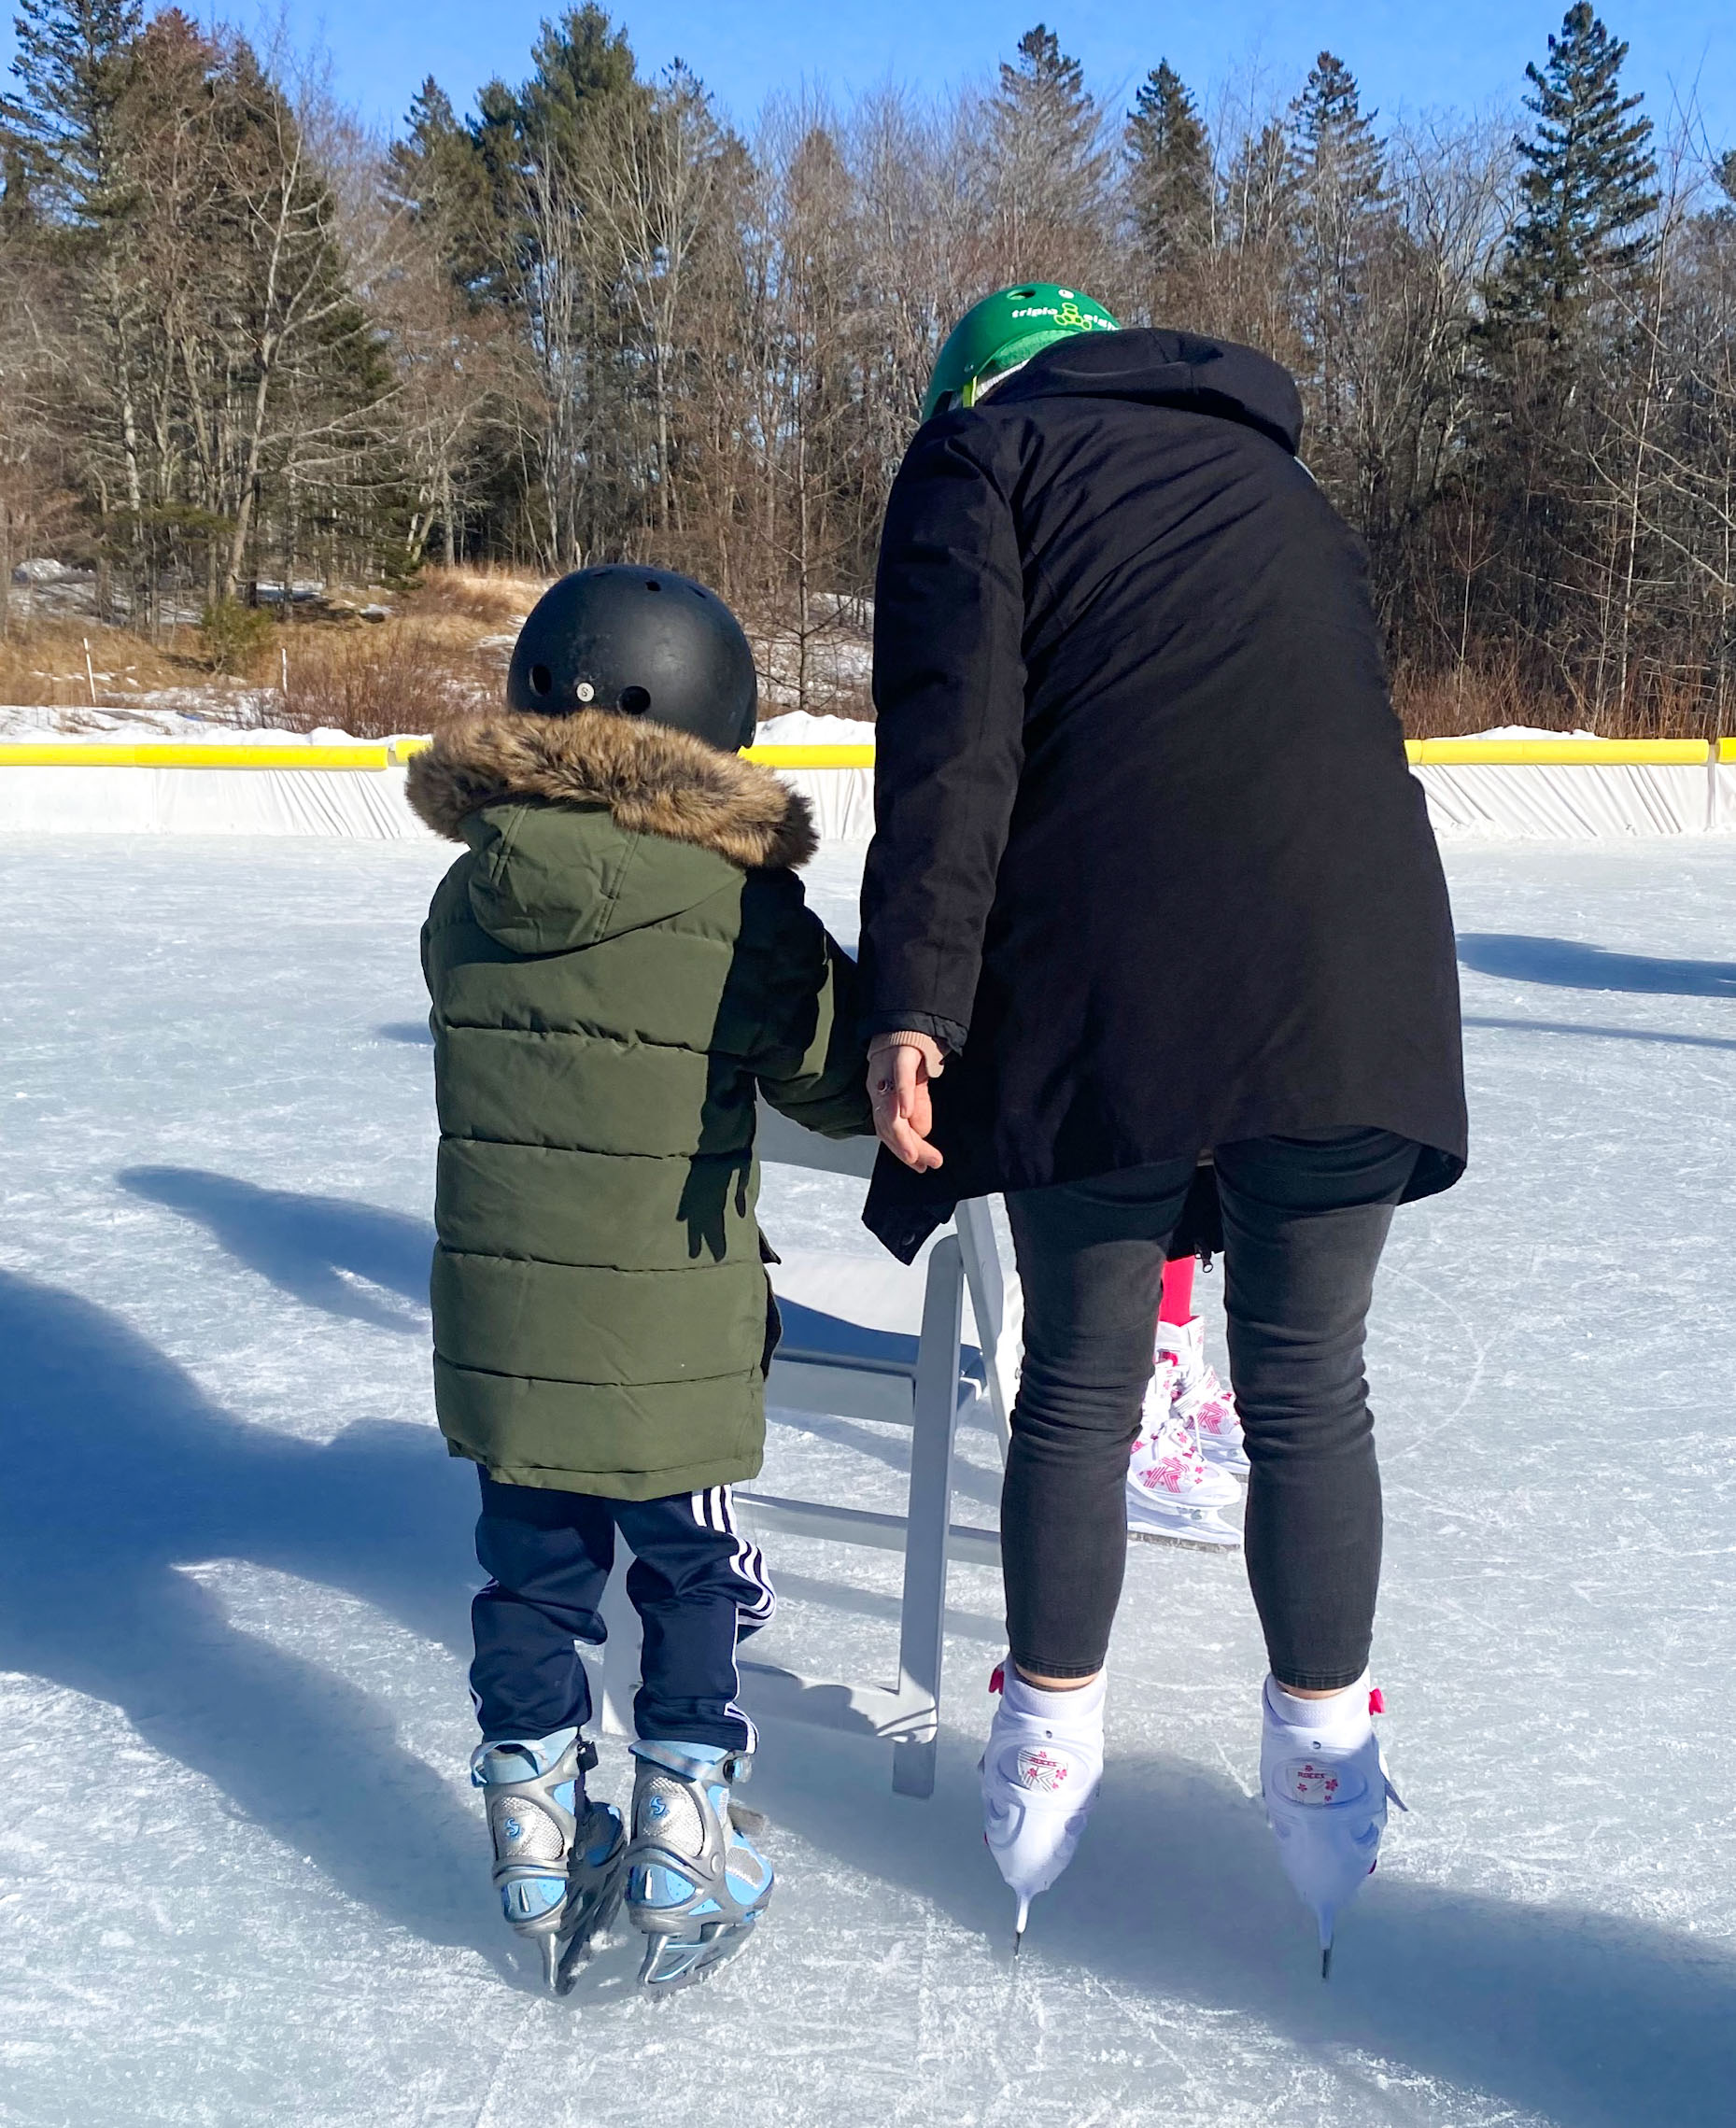 A color photo of a person helping a child learning to skate